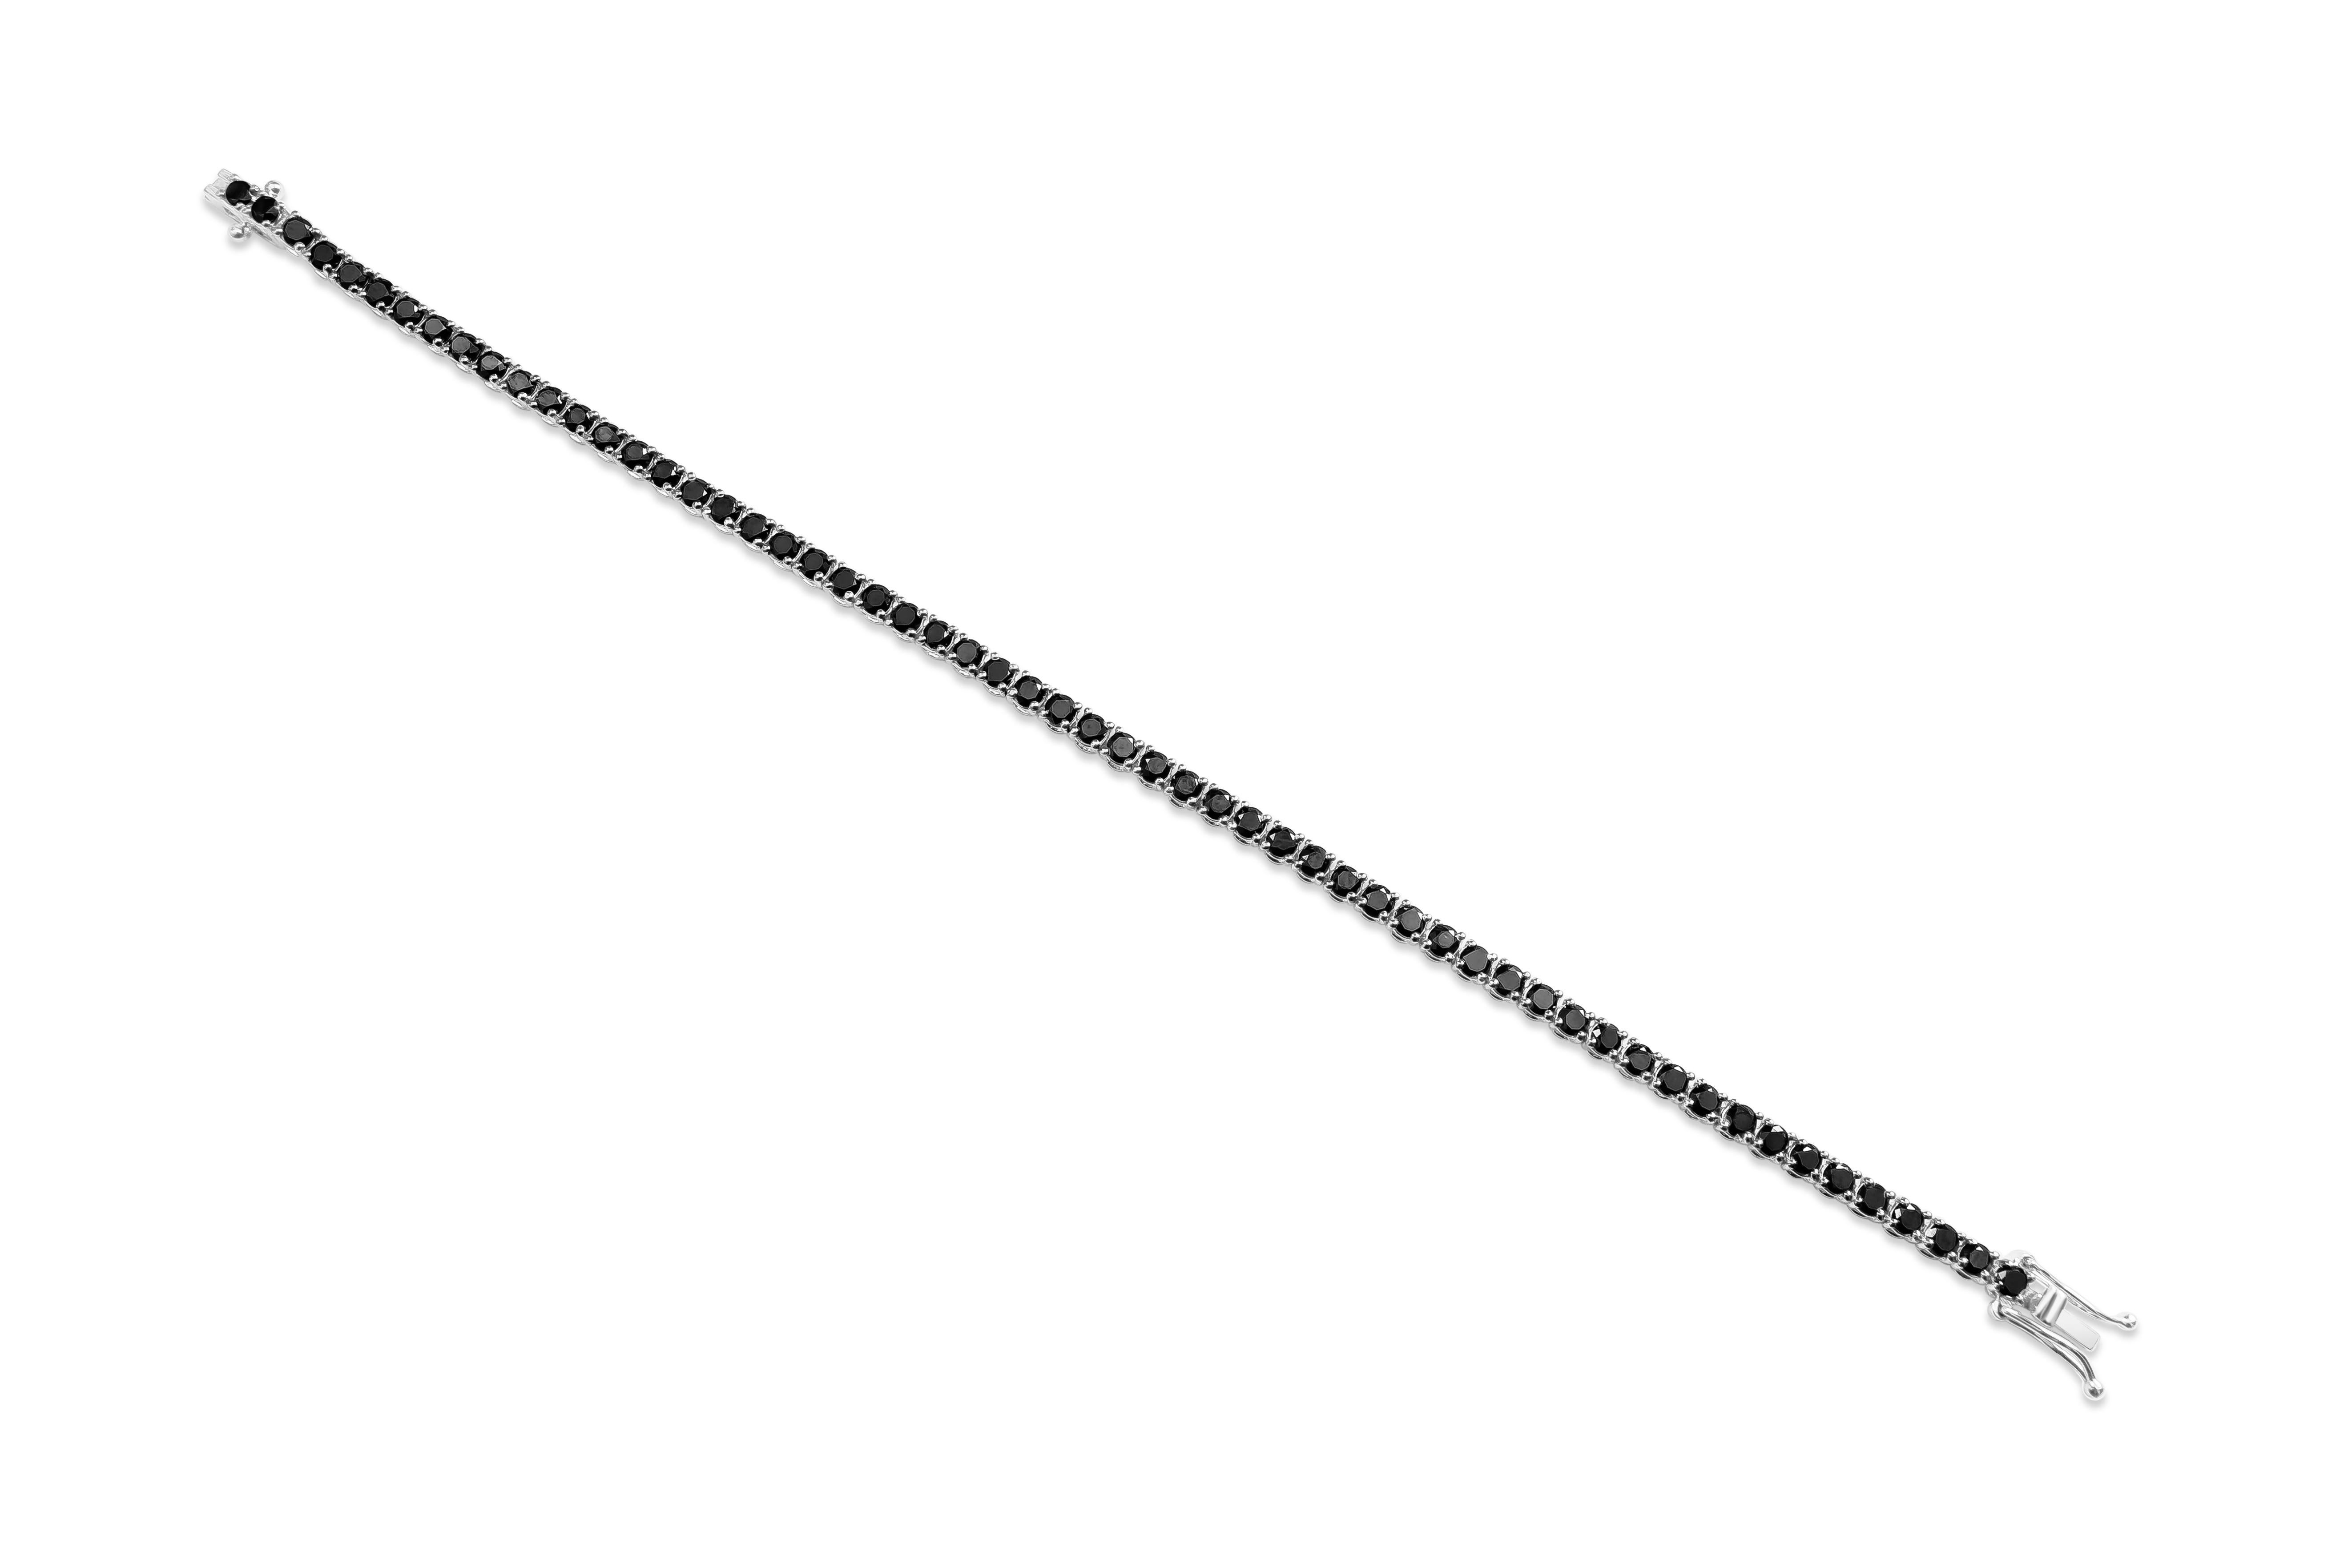 This tennis bracelet features 58 round brilliant black diamonds weighing 4.86 carats total set in a 4 prong setting. Made in 18k white gold. Size is 7 inches.

Style available in different price ranges. Prices are based on your selection of the 4C’s